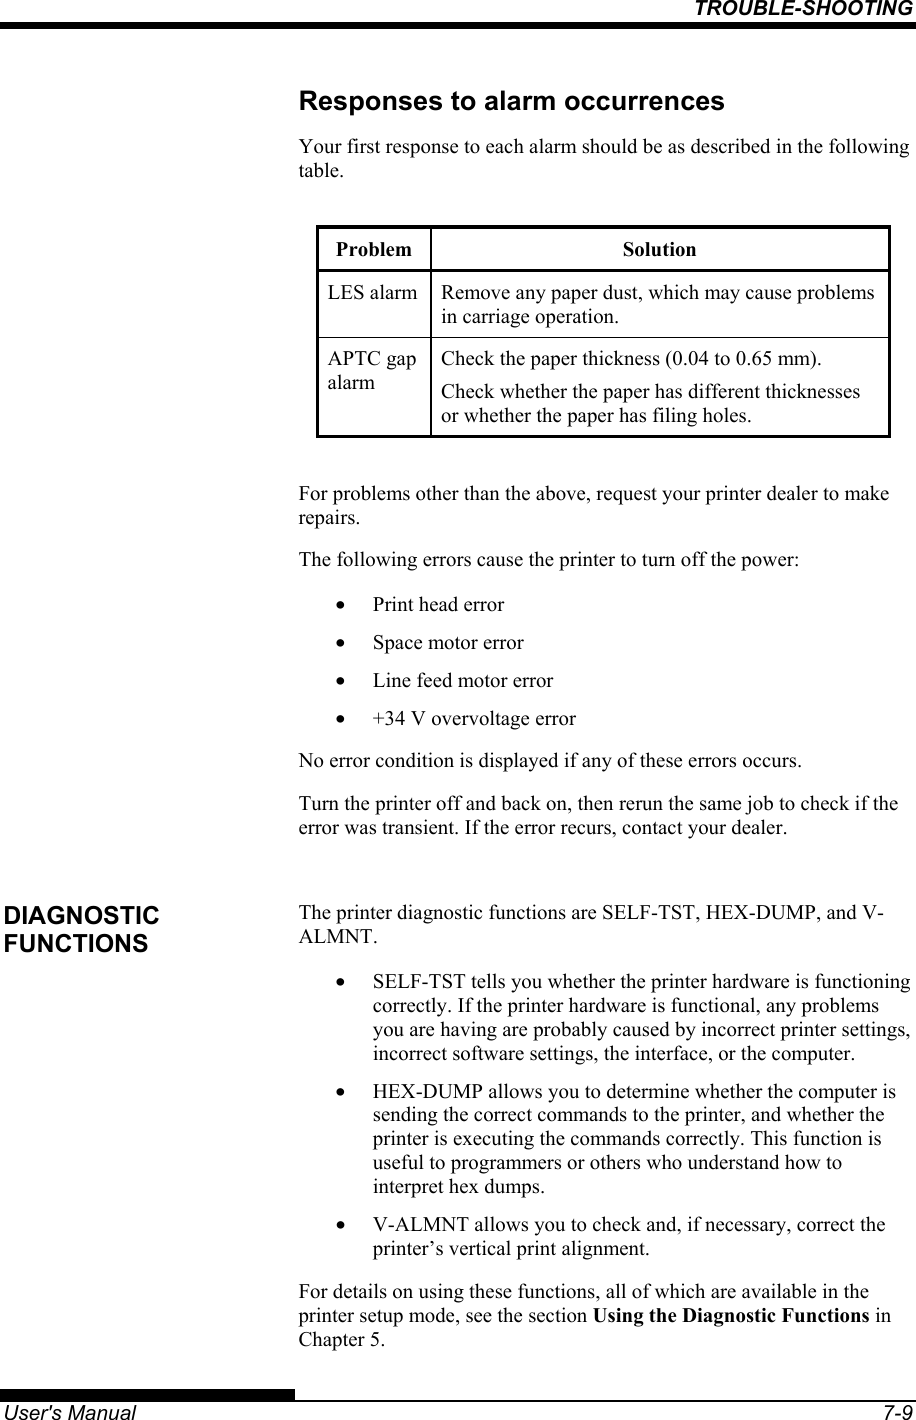 TROUBLE-SHOOTING   User&apos;s Manual  7-9 Responses to alarm occurrences Your first response to each alarm should be as described in the following table.  Problem Solution LES alarm  Remove any paper dust, which may cause problems in carriage operation. APTC gap alarm Check the paper thickness (0.04 to 0.65 mm). Check whether the paper has different thicknesses or whether the paper has filing holes.  For problems other than the above, request your printer dealer to make repairs. The following errors cause the printer to turn off the power: •  Print head error •  Space motor error •  Line feed motor error •  +34 V overvoltage error No error condition is displayed if any of these errors occurs. Turn the printer off and back on, then rerun the same job to check if the error was transient. If the error recurs, contact your dealer.  The printer diagnostic functions are SELF-TST, HEX-DUMP, and V-ALMNT. •  SELF-TST tells you whether the printer hardware is functioning correctly. If the printer hardware is functional, any problems you are having are probably caused by incorrect printer settings, incorrect software settings, the interface, or the computer. •  HEX-DUMP allows you to determine whether the computer is sending the correct commands to the printer, and whether the printer is executing the commands correctly. This function is useful to programmers or others who understand how to interpret hex dumps. •  V-ALMNT allows you to check and, if necessary, correct the printer’s vertical print alignment. For details on using these functions, all of which are available in the printer setup mode, see the section Using the Diagnostic Functions in Chapter 5. DIAGNOSTIC FUNCTIONS 